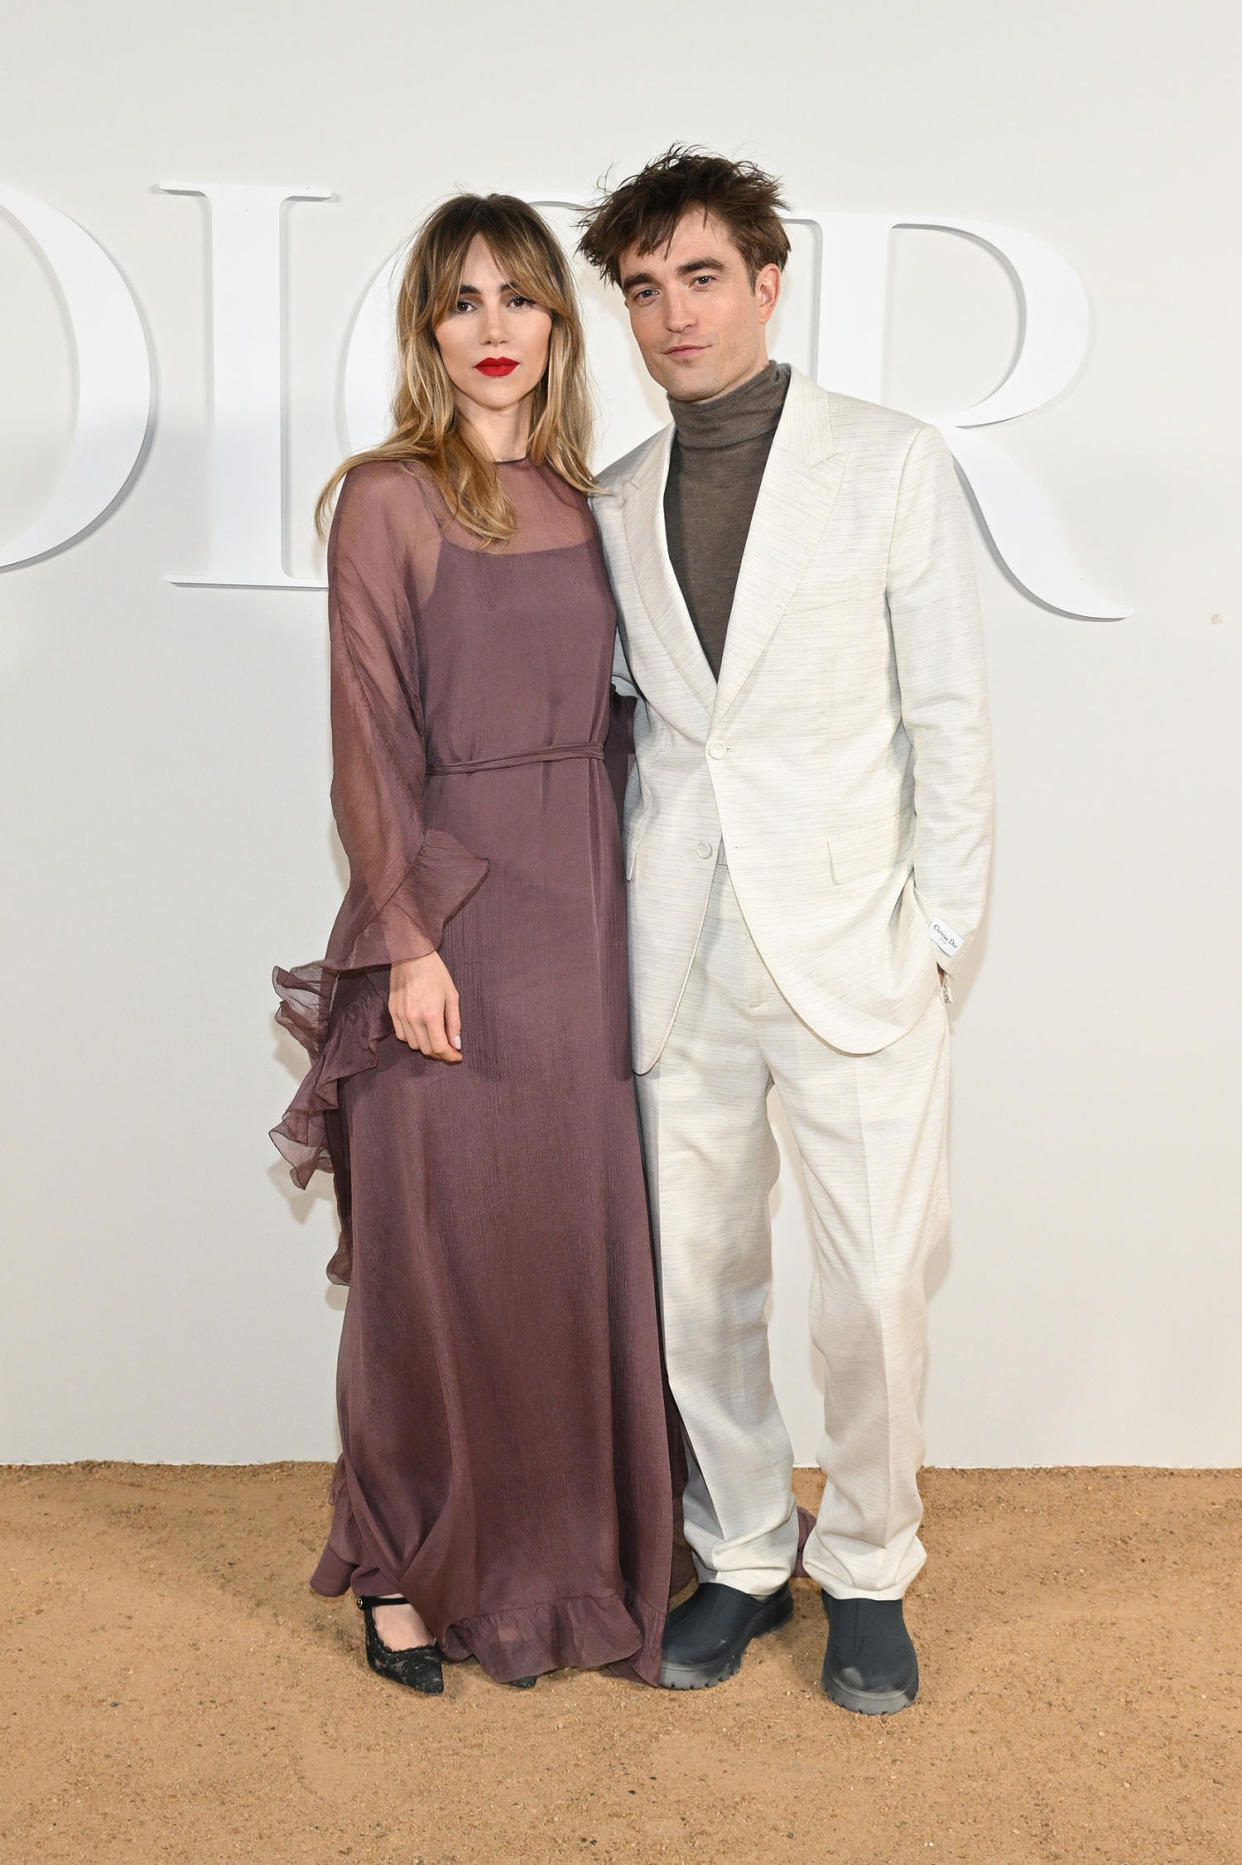 Suki Waterhouse and Robert Pattinson attend the Dior Fall 2023 Menswear Show on December 03, 2022 in Giza, Egypt. (Stephane Cardinale / Corbis via Getty Images)